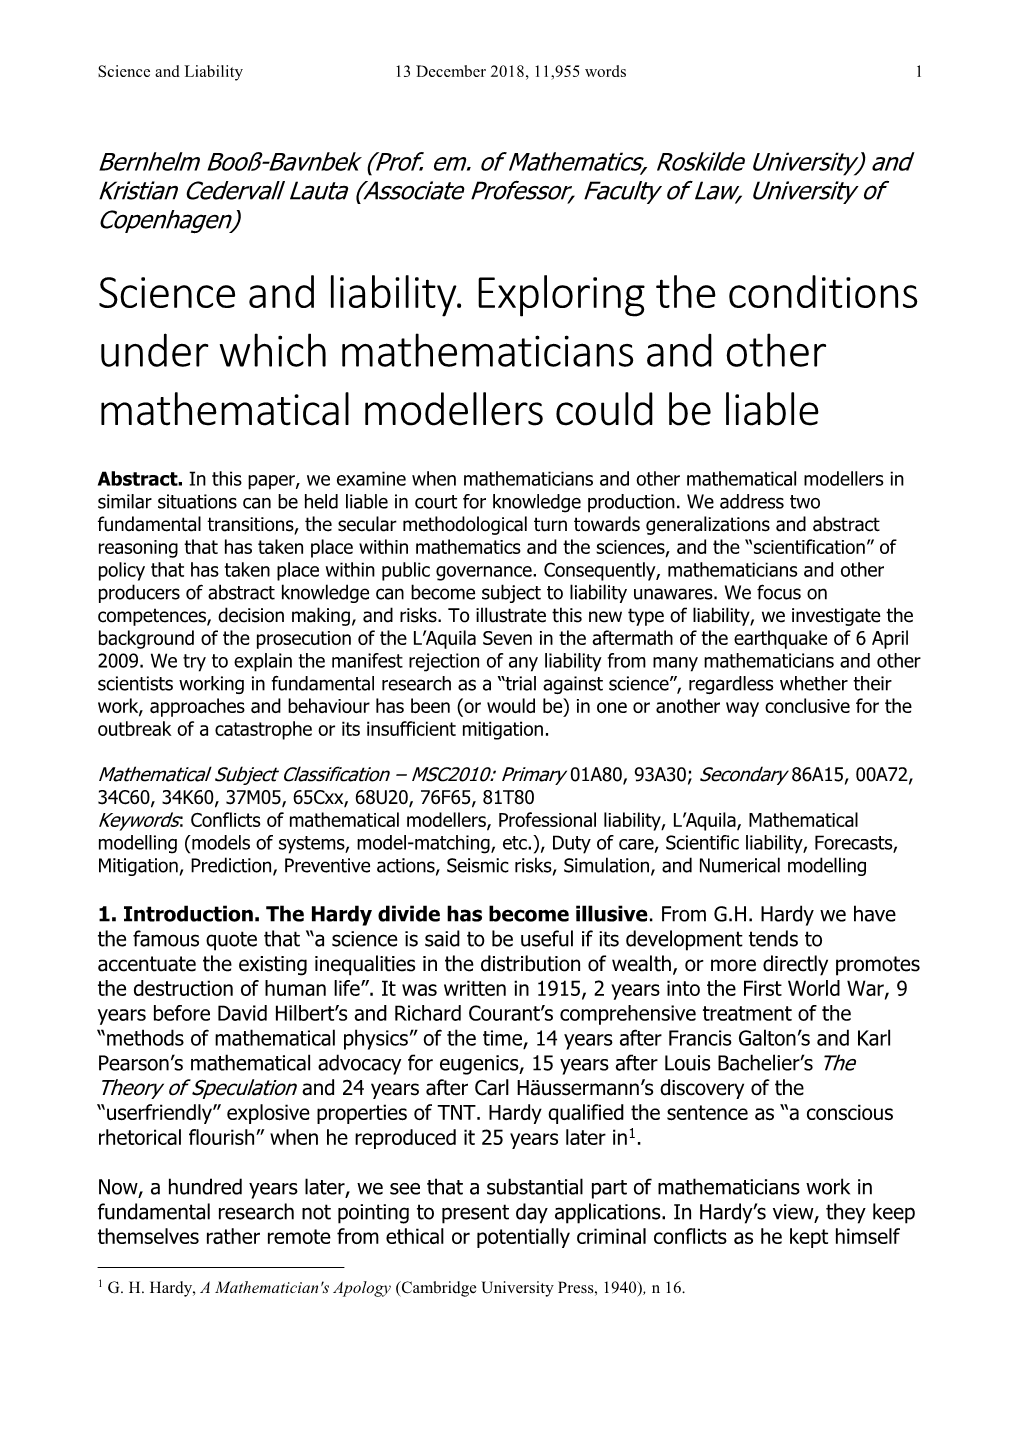 Science and Liability. Exploring the Conditions Under Which Mathematicians and Other Mathematical Modellers Could Be Liable